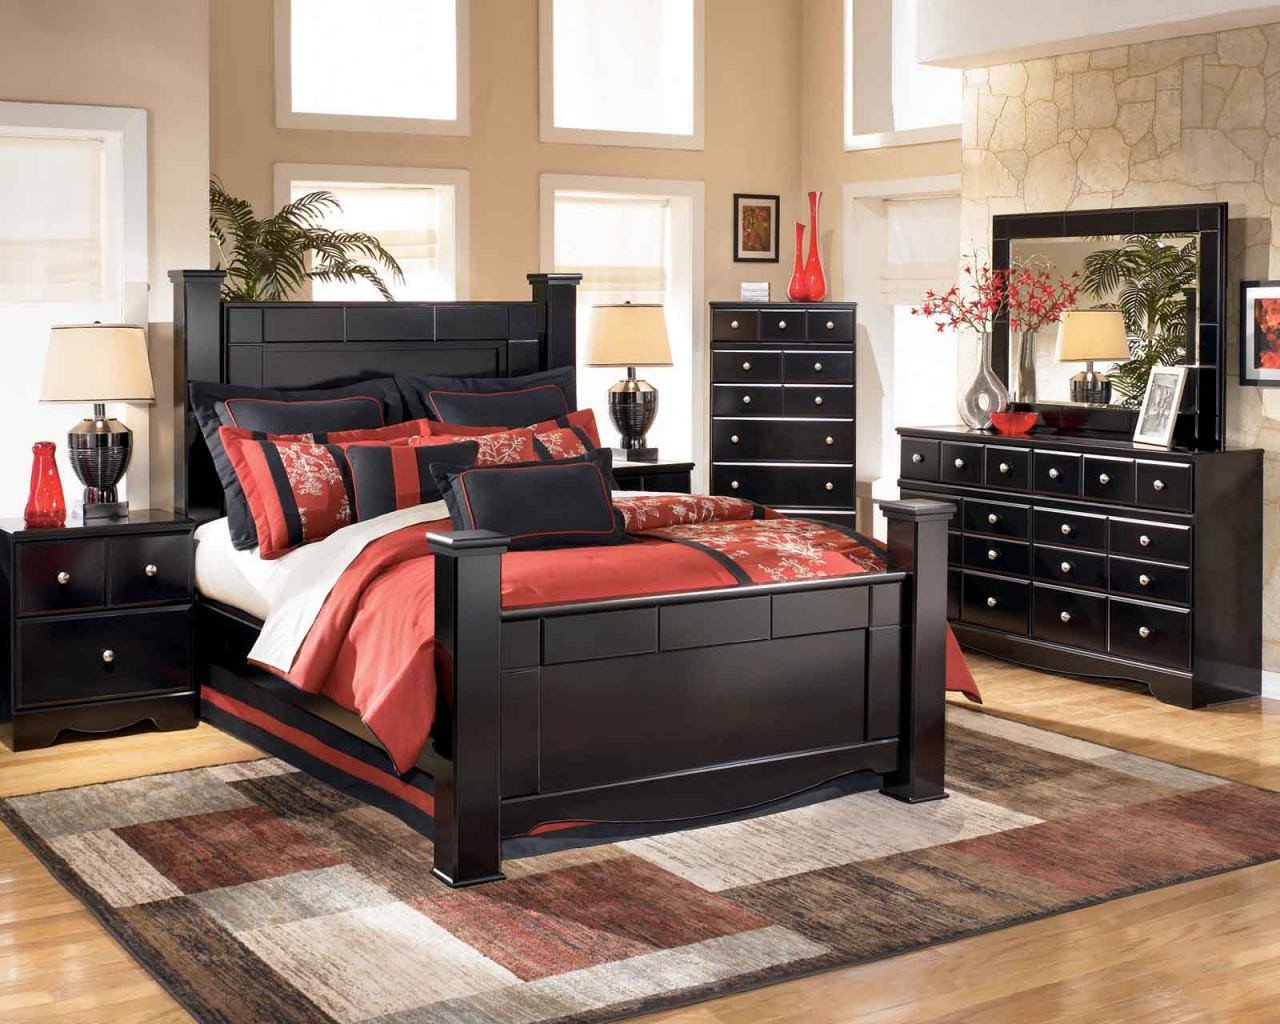 Bedroom Set with Mattress Included Beautiful Shay Poster Bedroom Set In Black